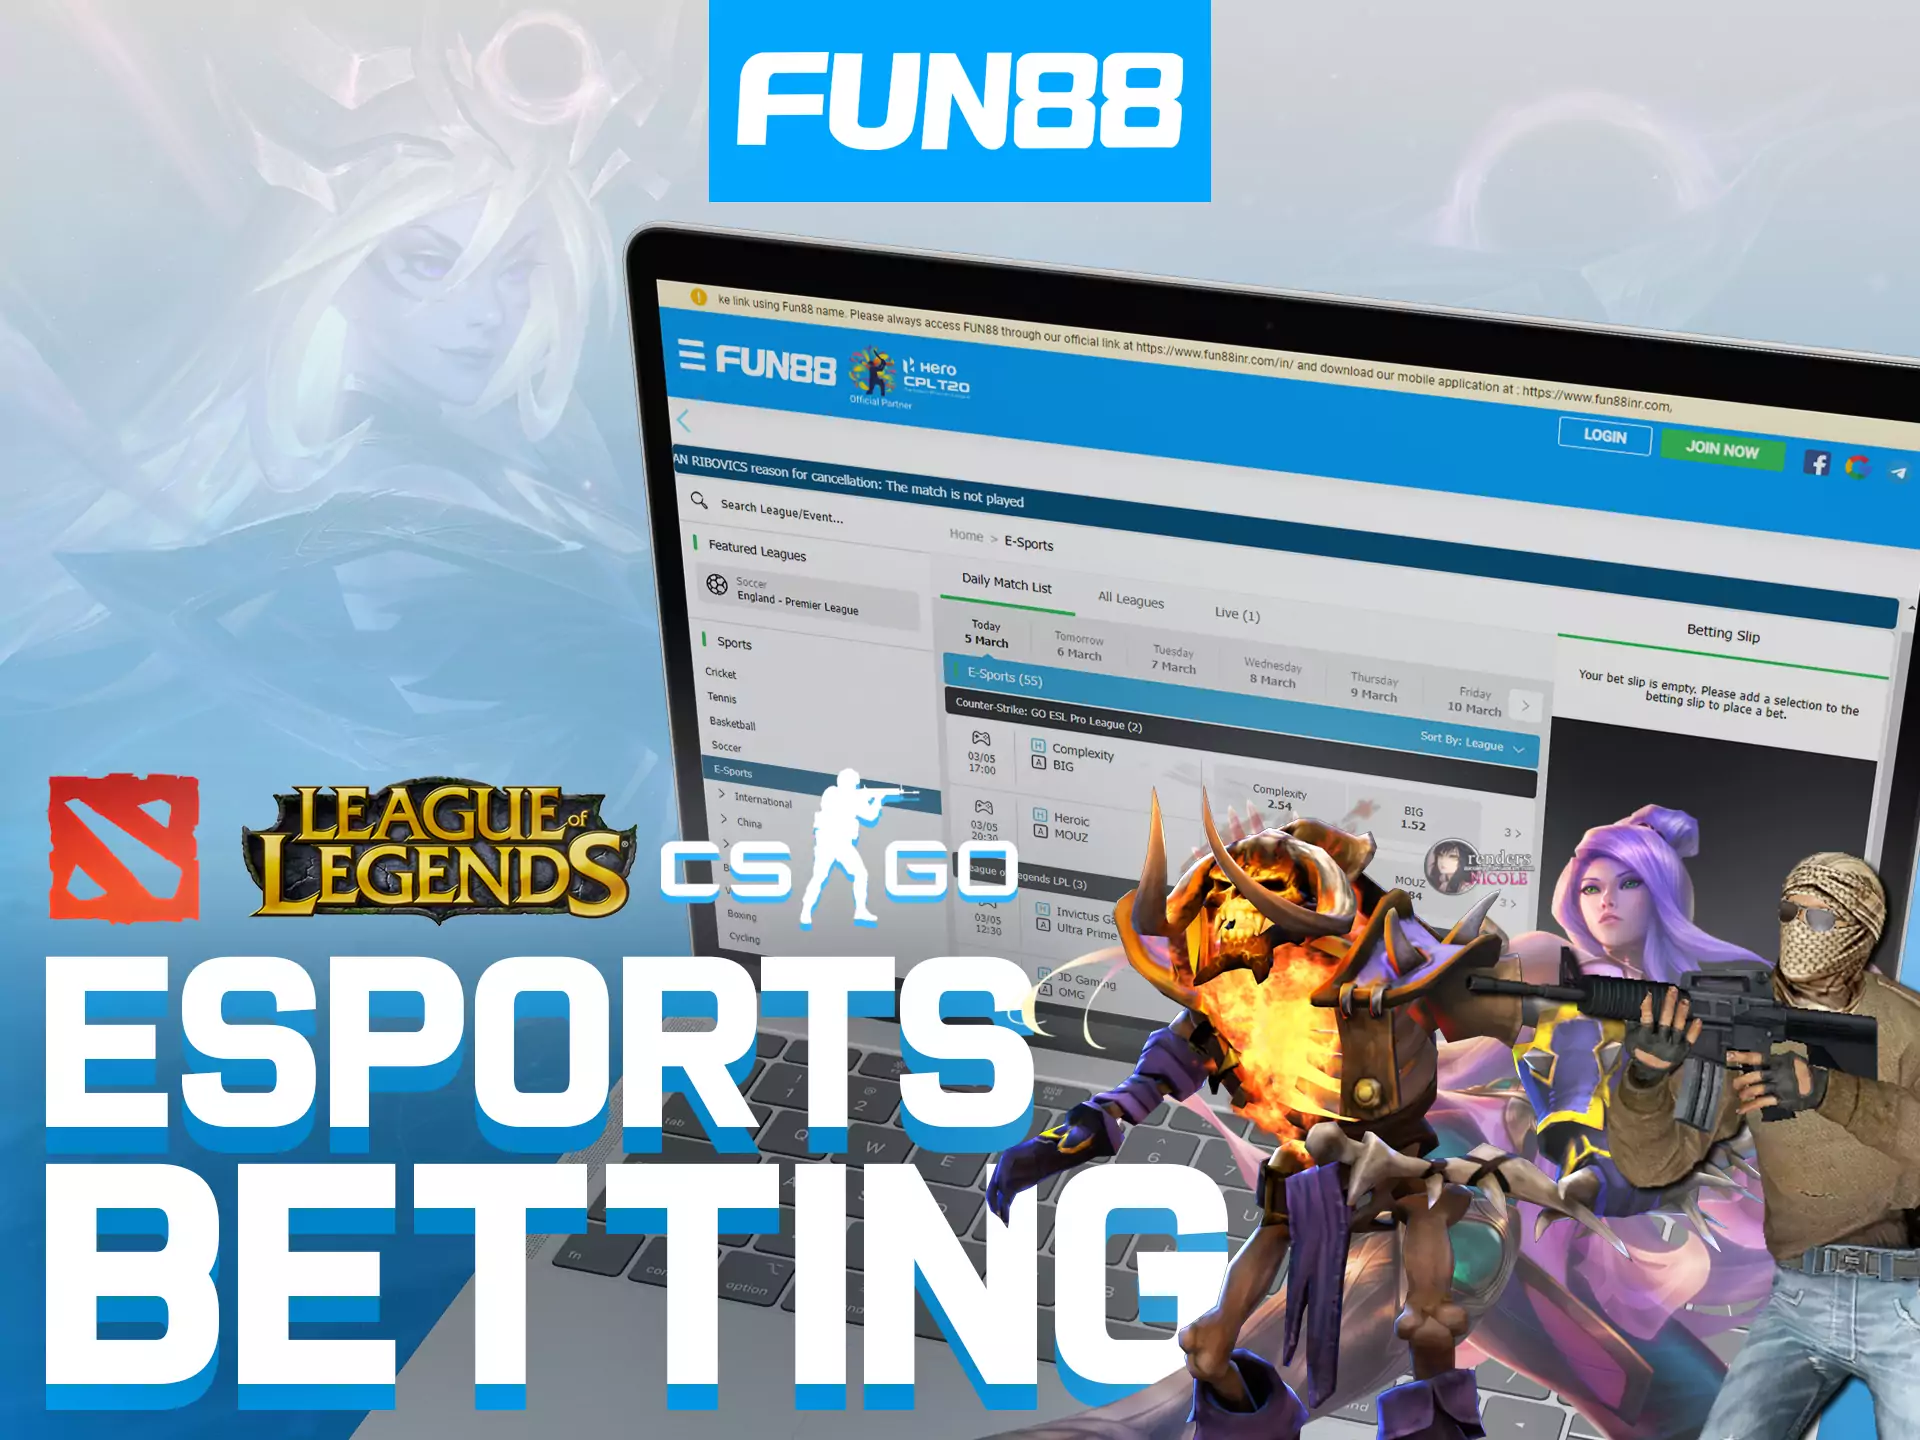 Fun88 bet on esports if you are a real fan.